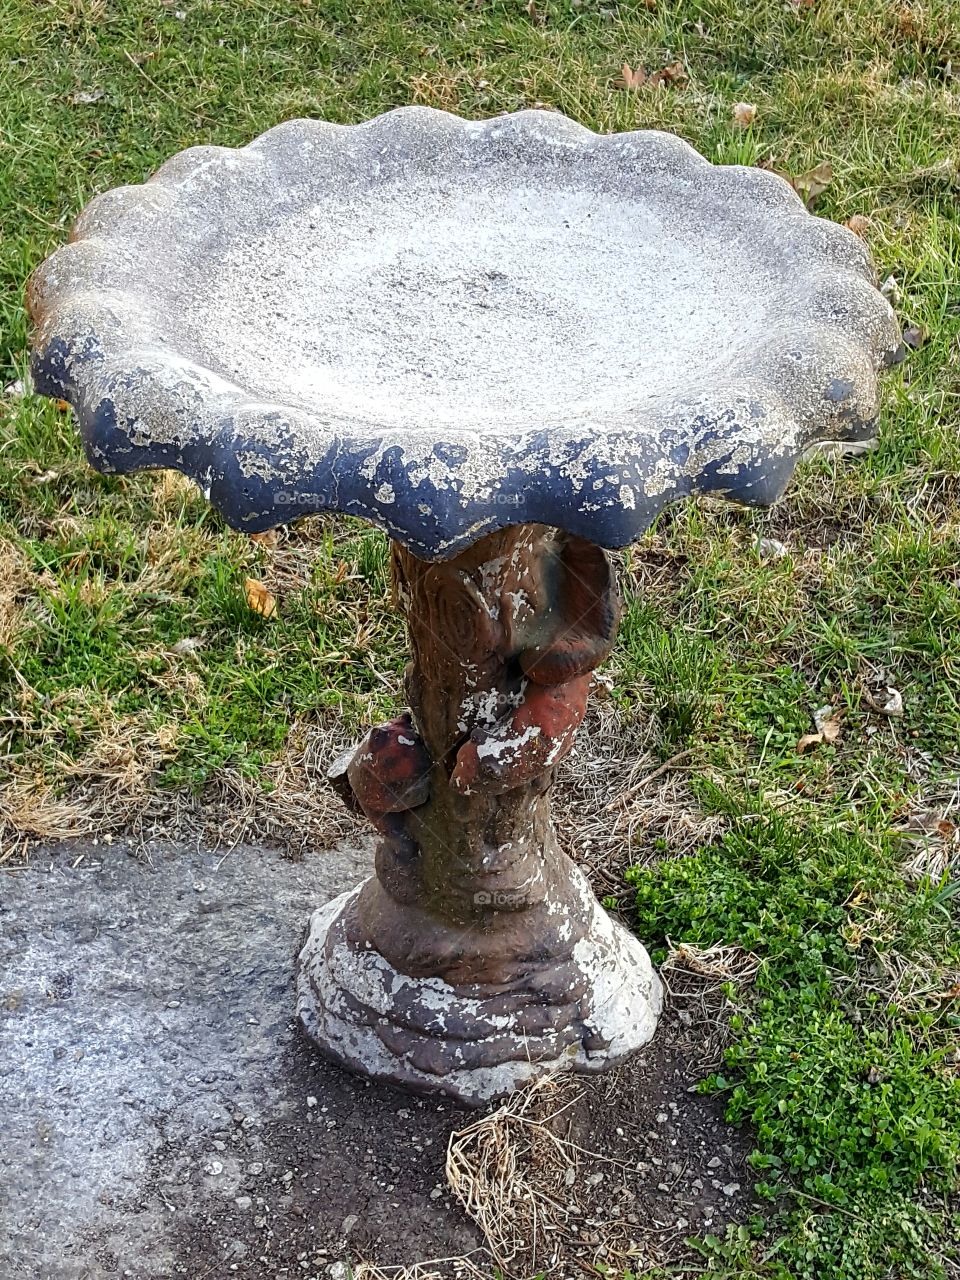 This old birdbath has been on our property since I can remember.